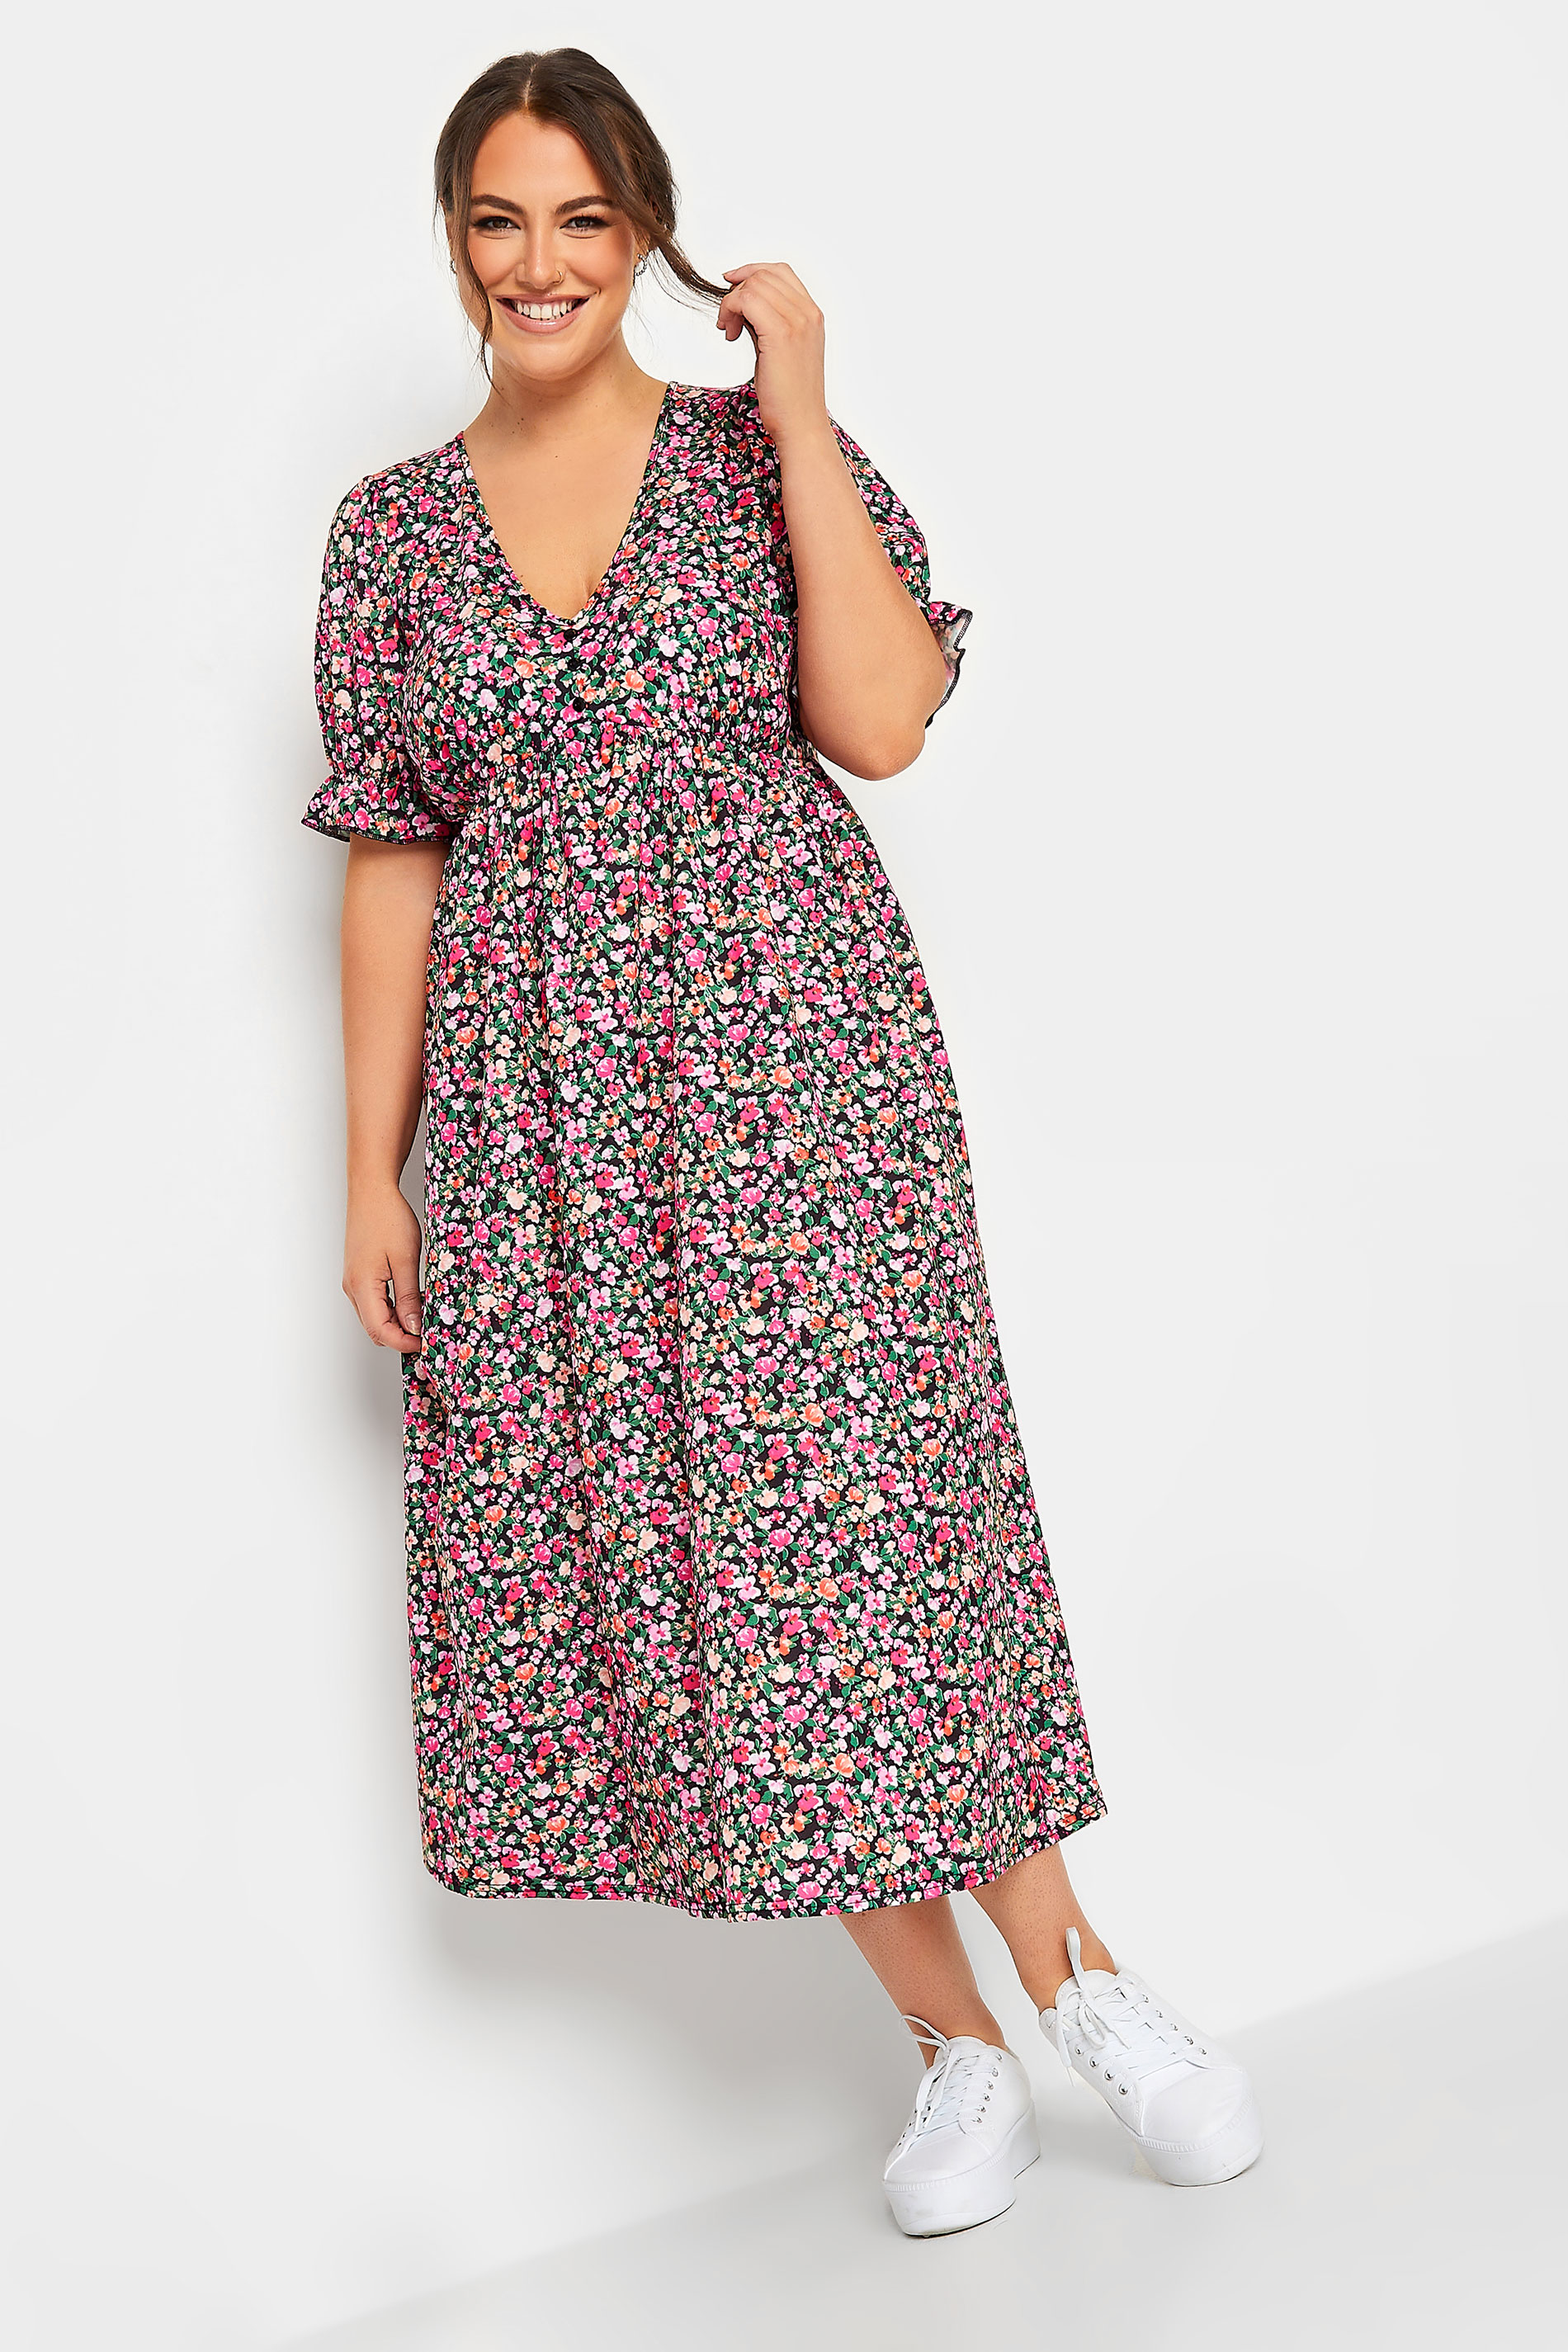 https://cdn.yoursclothing.com/Images/ProductImages/52bf93ae-aed9-43_215925_B.jpg